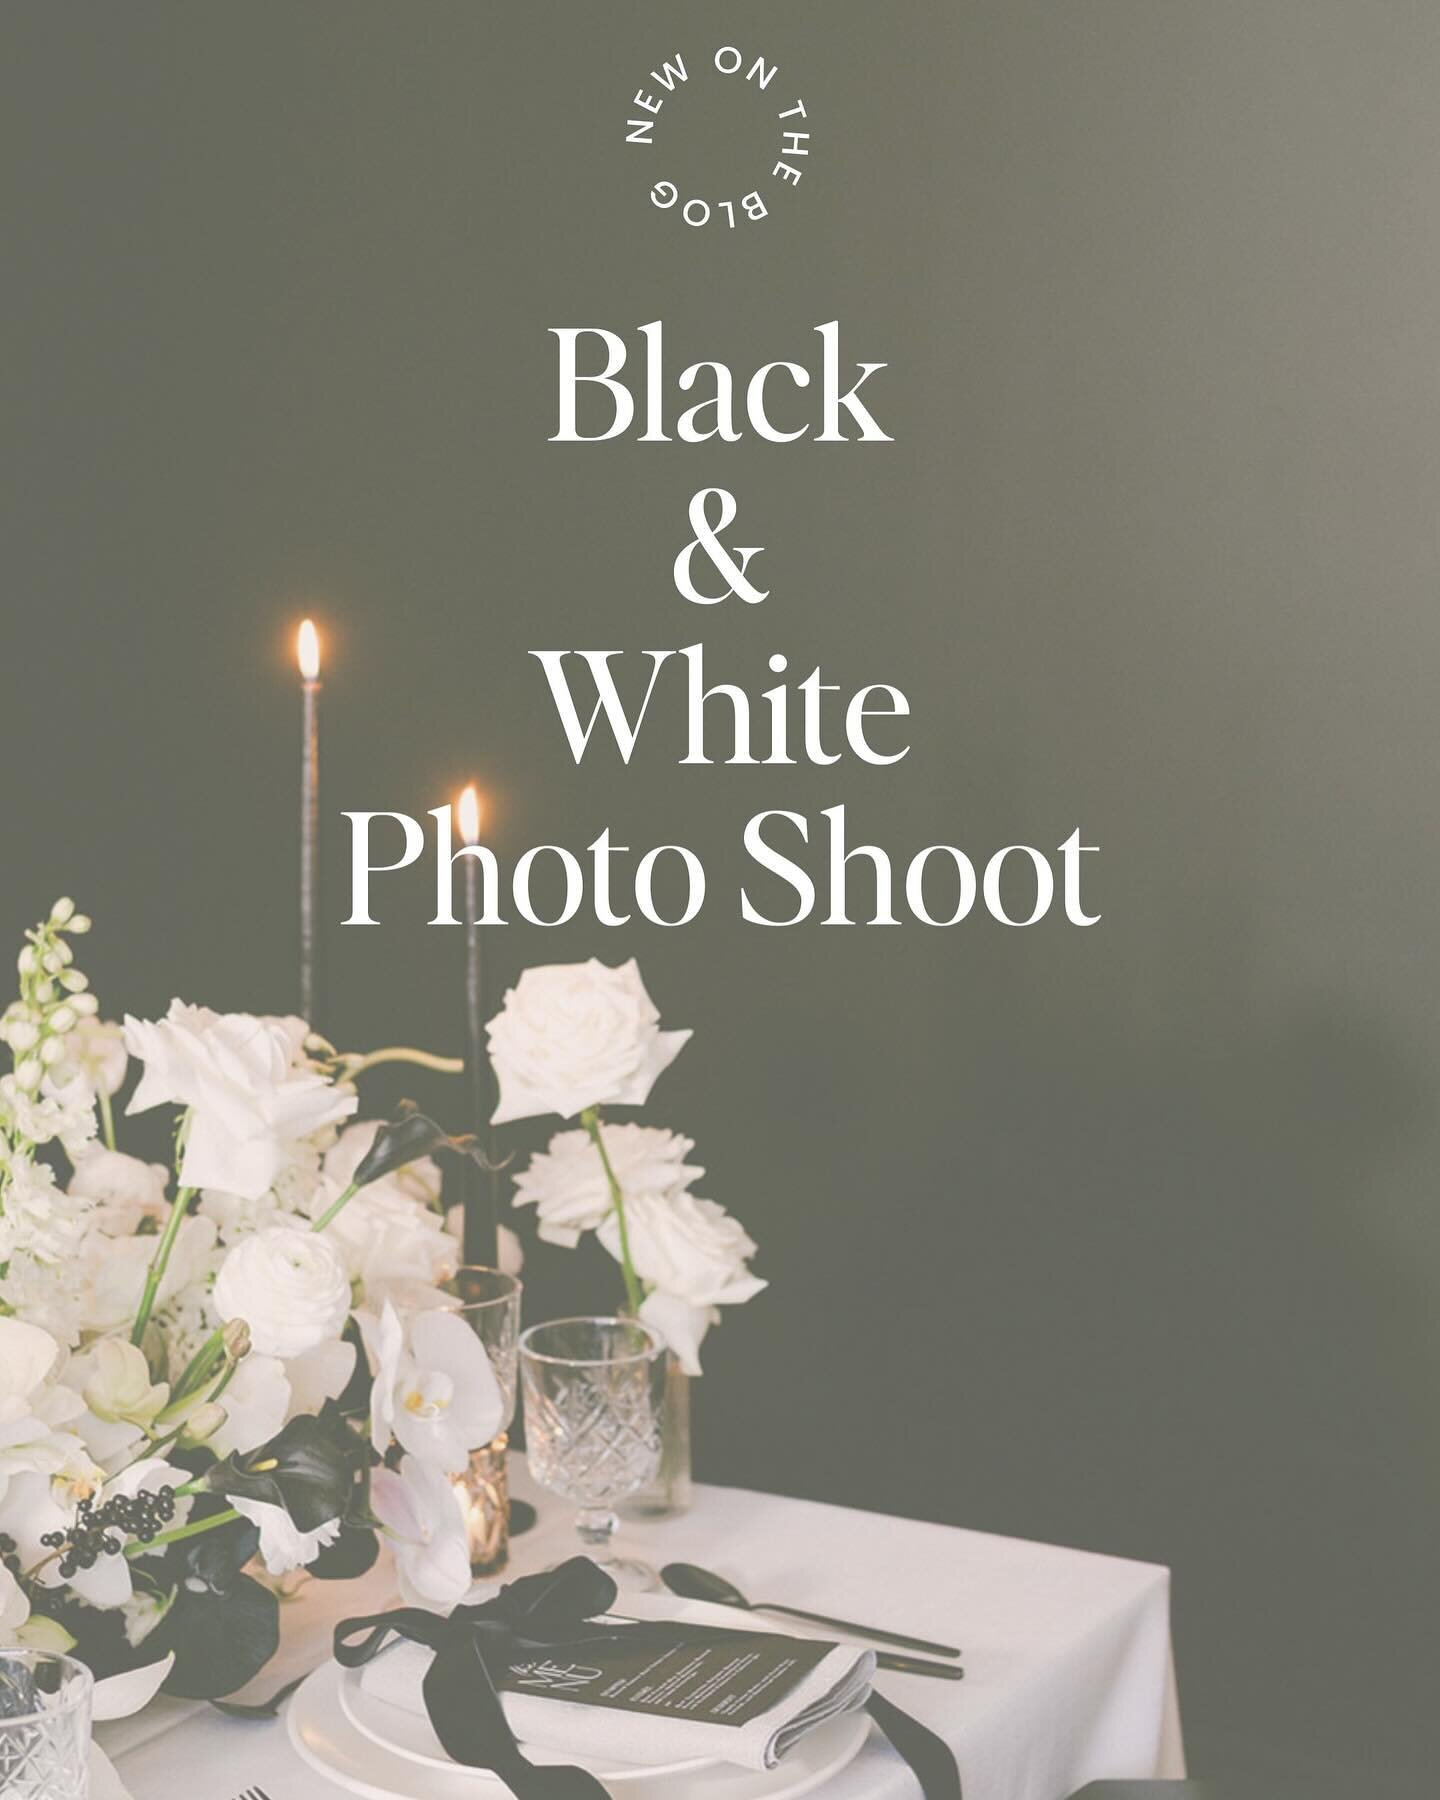 Timeless Black &amp; White all wrapped up in a bow.

On the blog at last. 

#kasiaware #weddingplanning #weddingplanner #blackandwhitewedding #blackandwhitetablescape #blackelementswedding #tablescaping #oakville #burlon